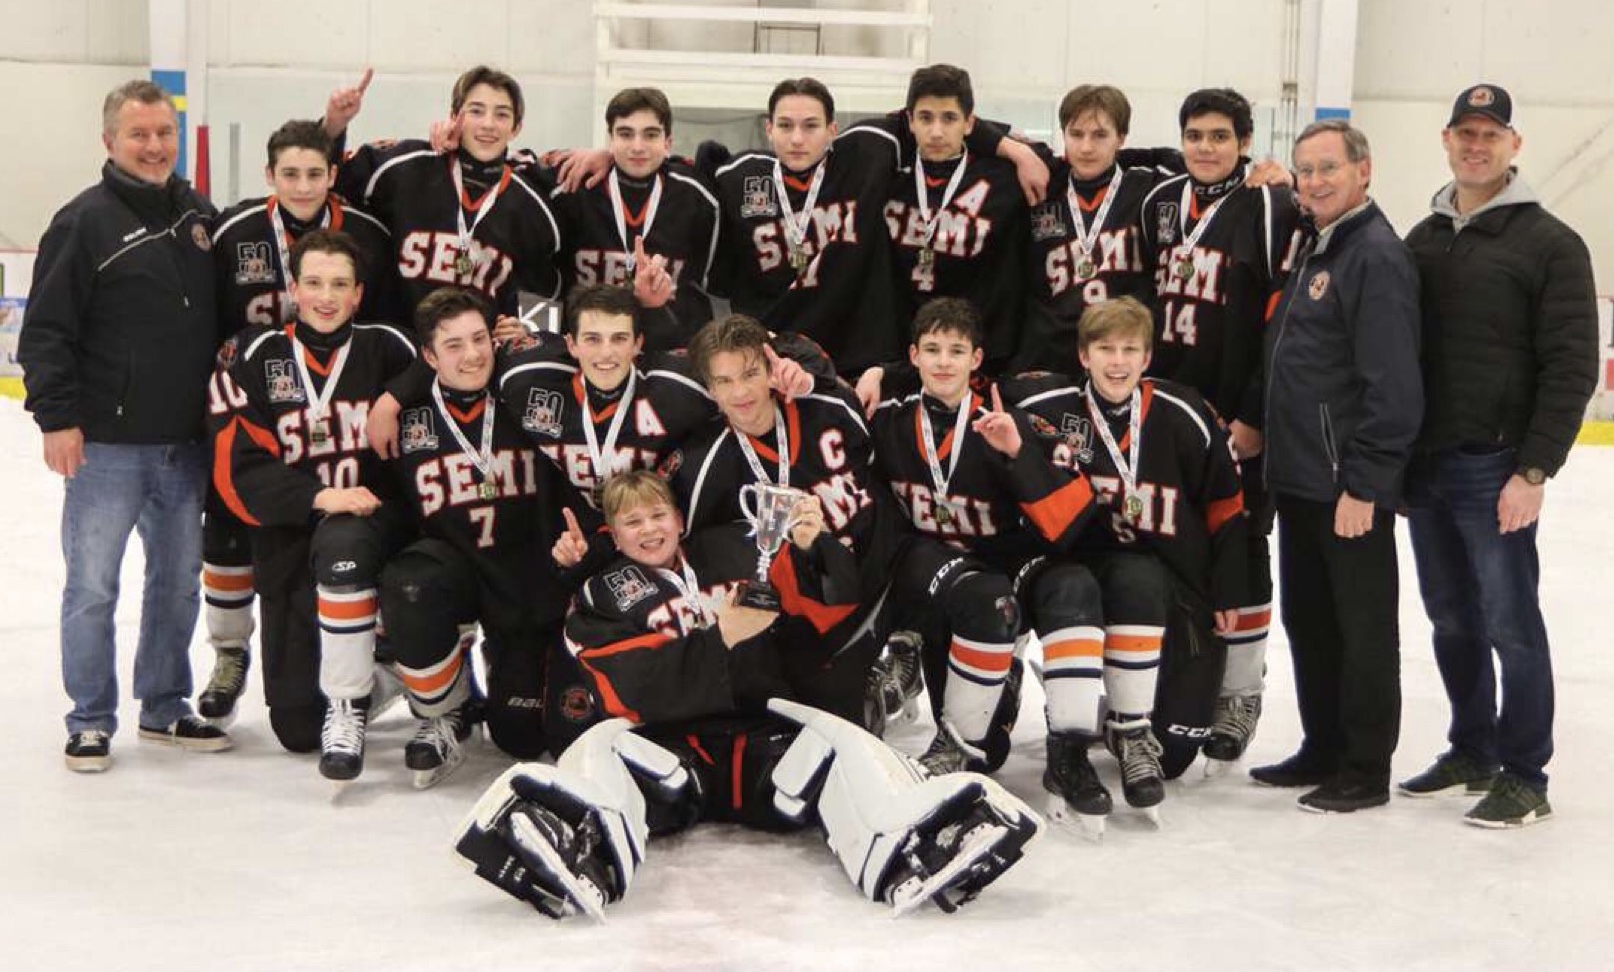 February 17, 2020 ~ Midget C6 won gold at the Battle For The Sound Tournament in Bremerton, WA. Great work team!